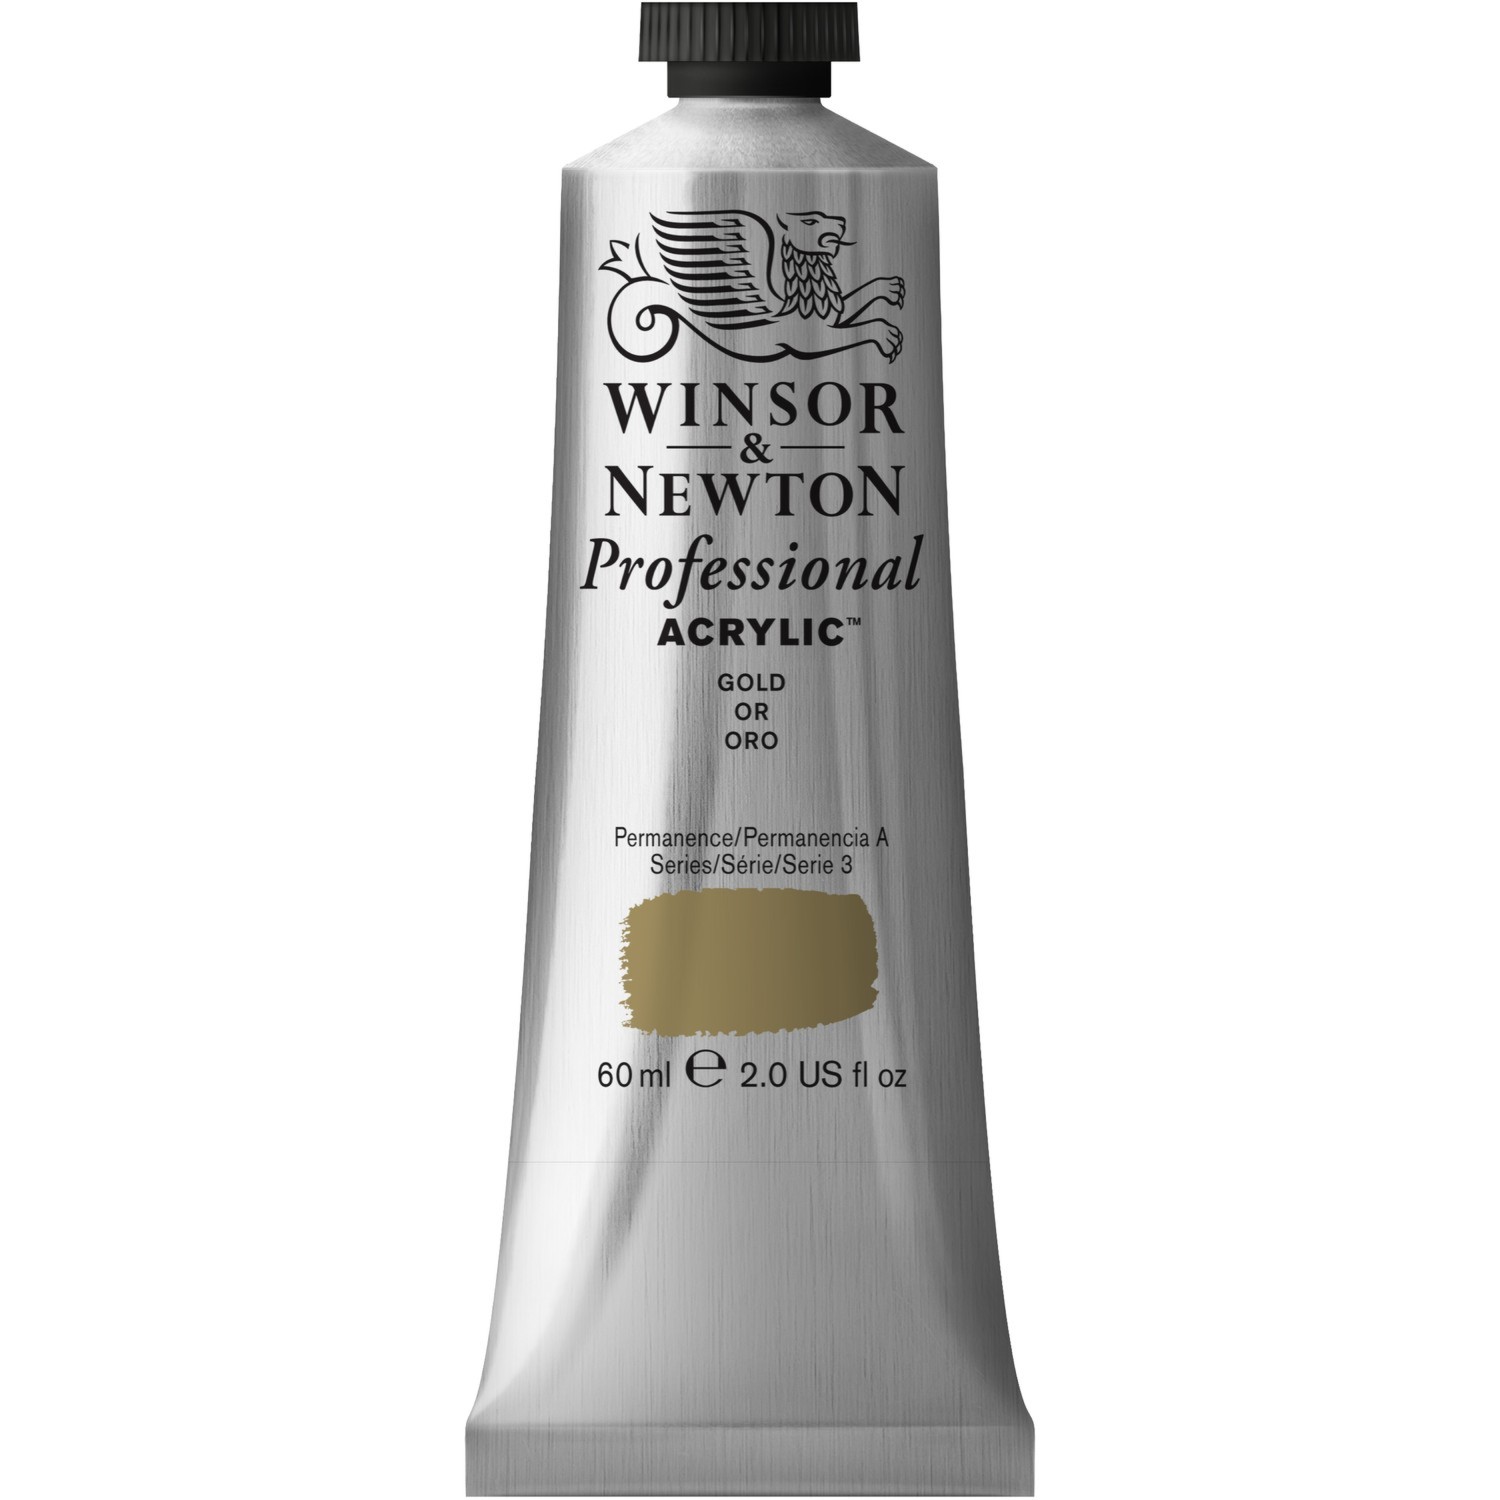 Winsor and Newton 60ml Professional Acrylic Paint - Gold Image 1